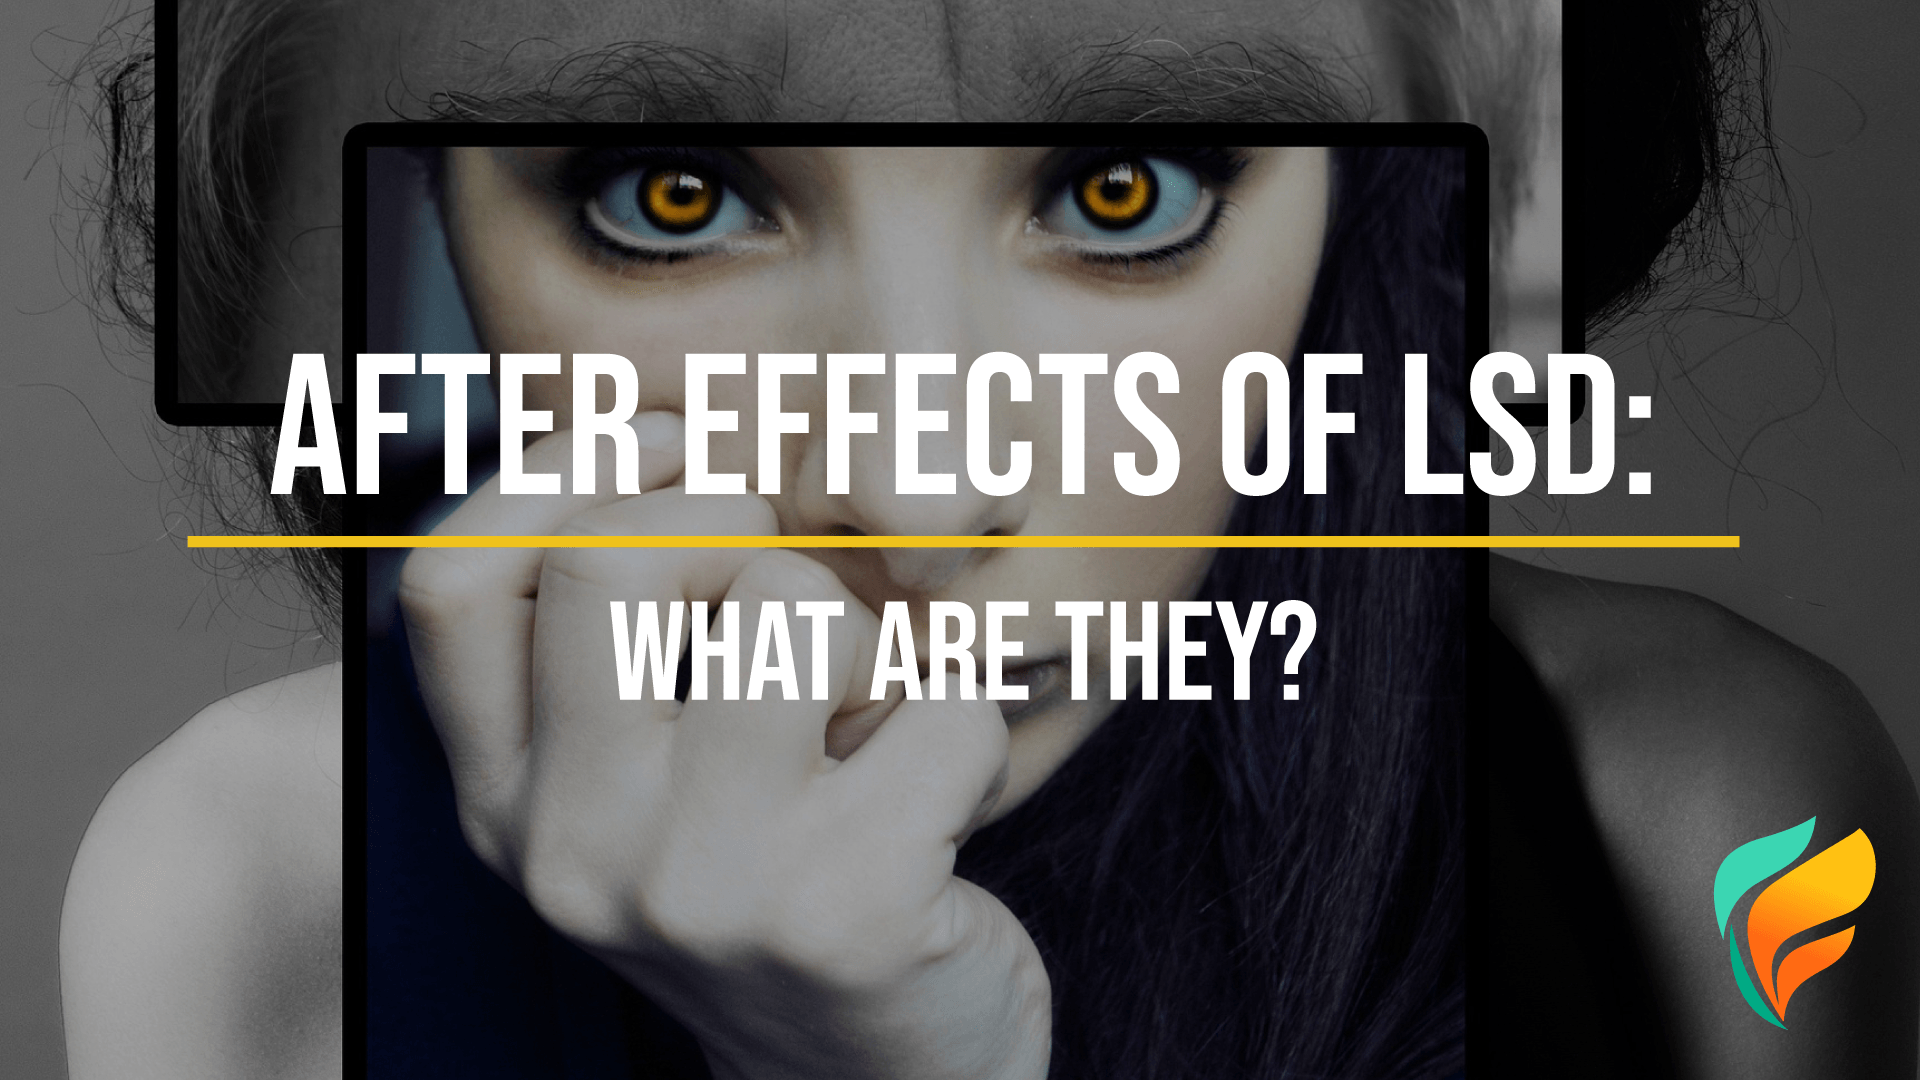 After Effects of LSD: Long-Term Effects of Acid